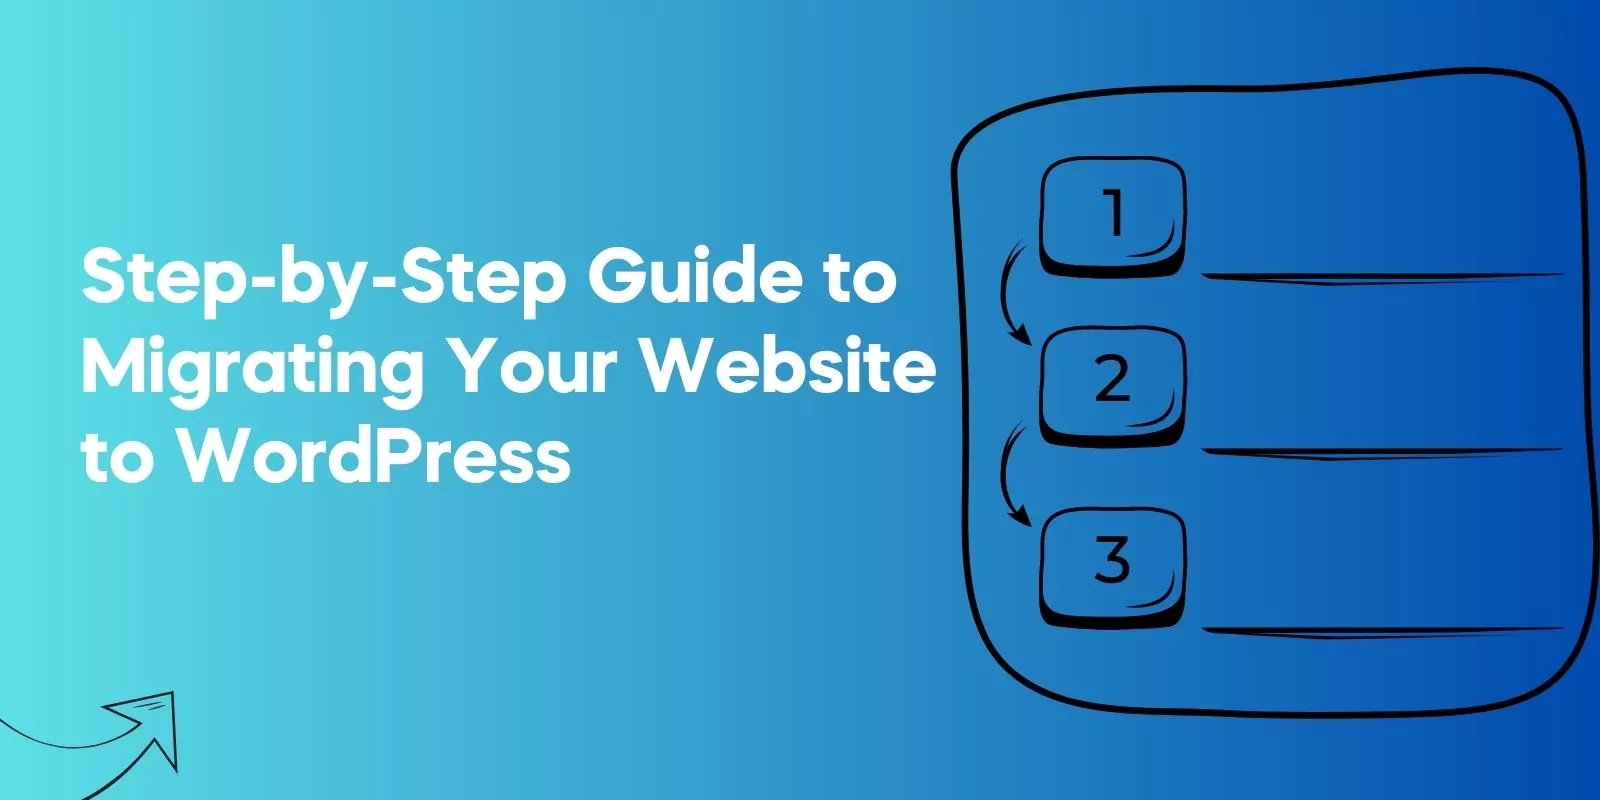 Step-by-Step Guide to Migrating Your Website to WordPress